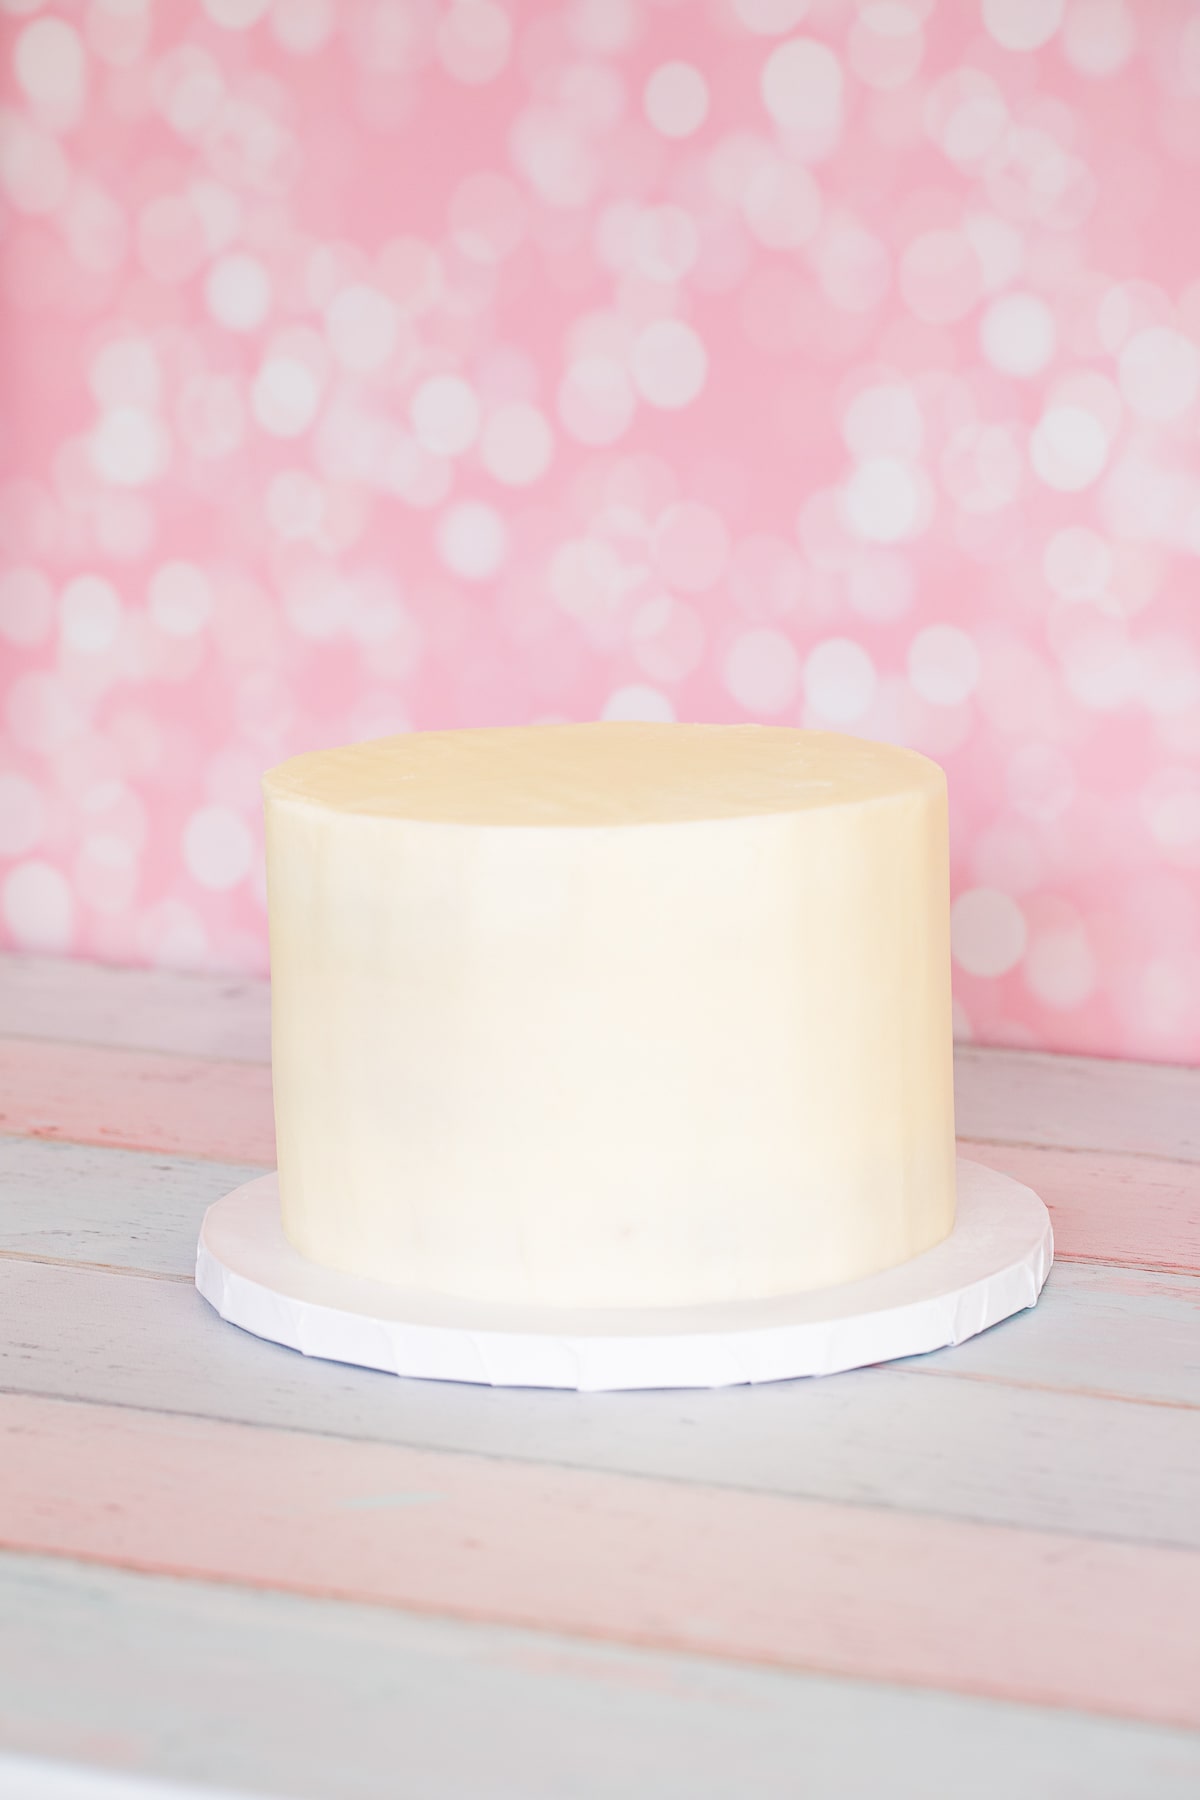 frosted layer cake on cake board